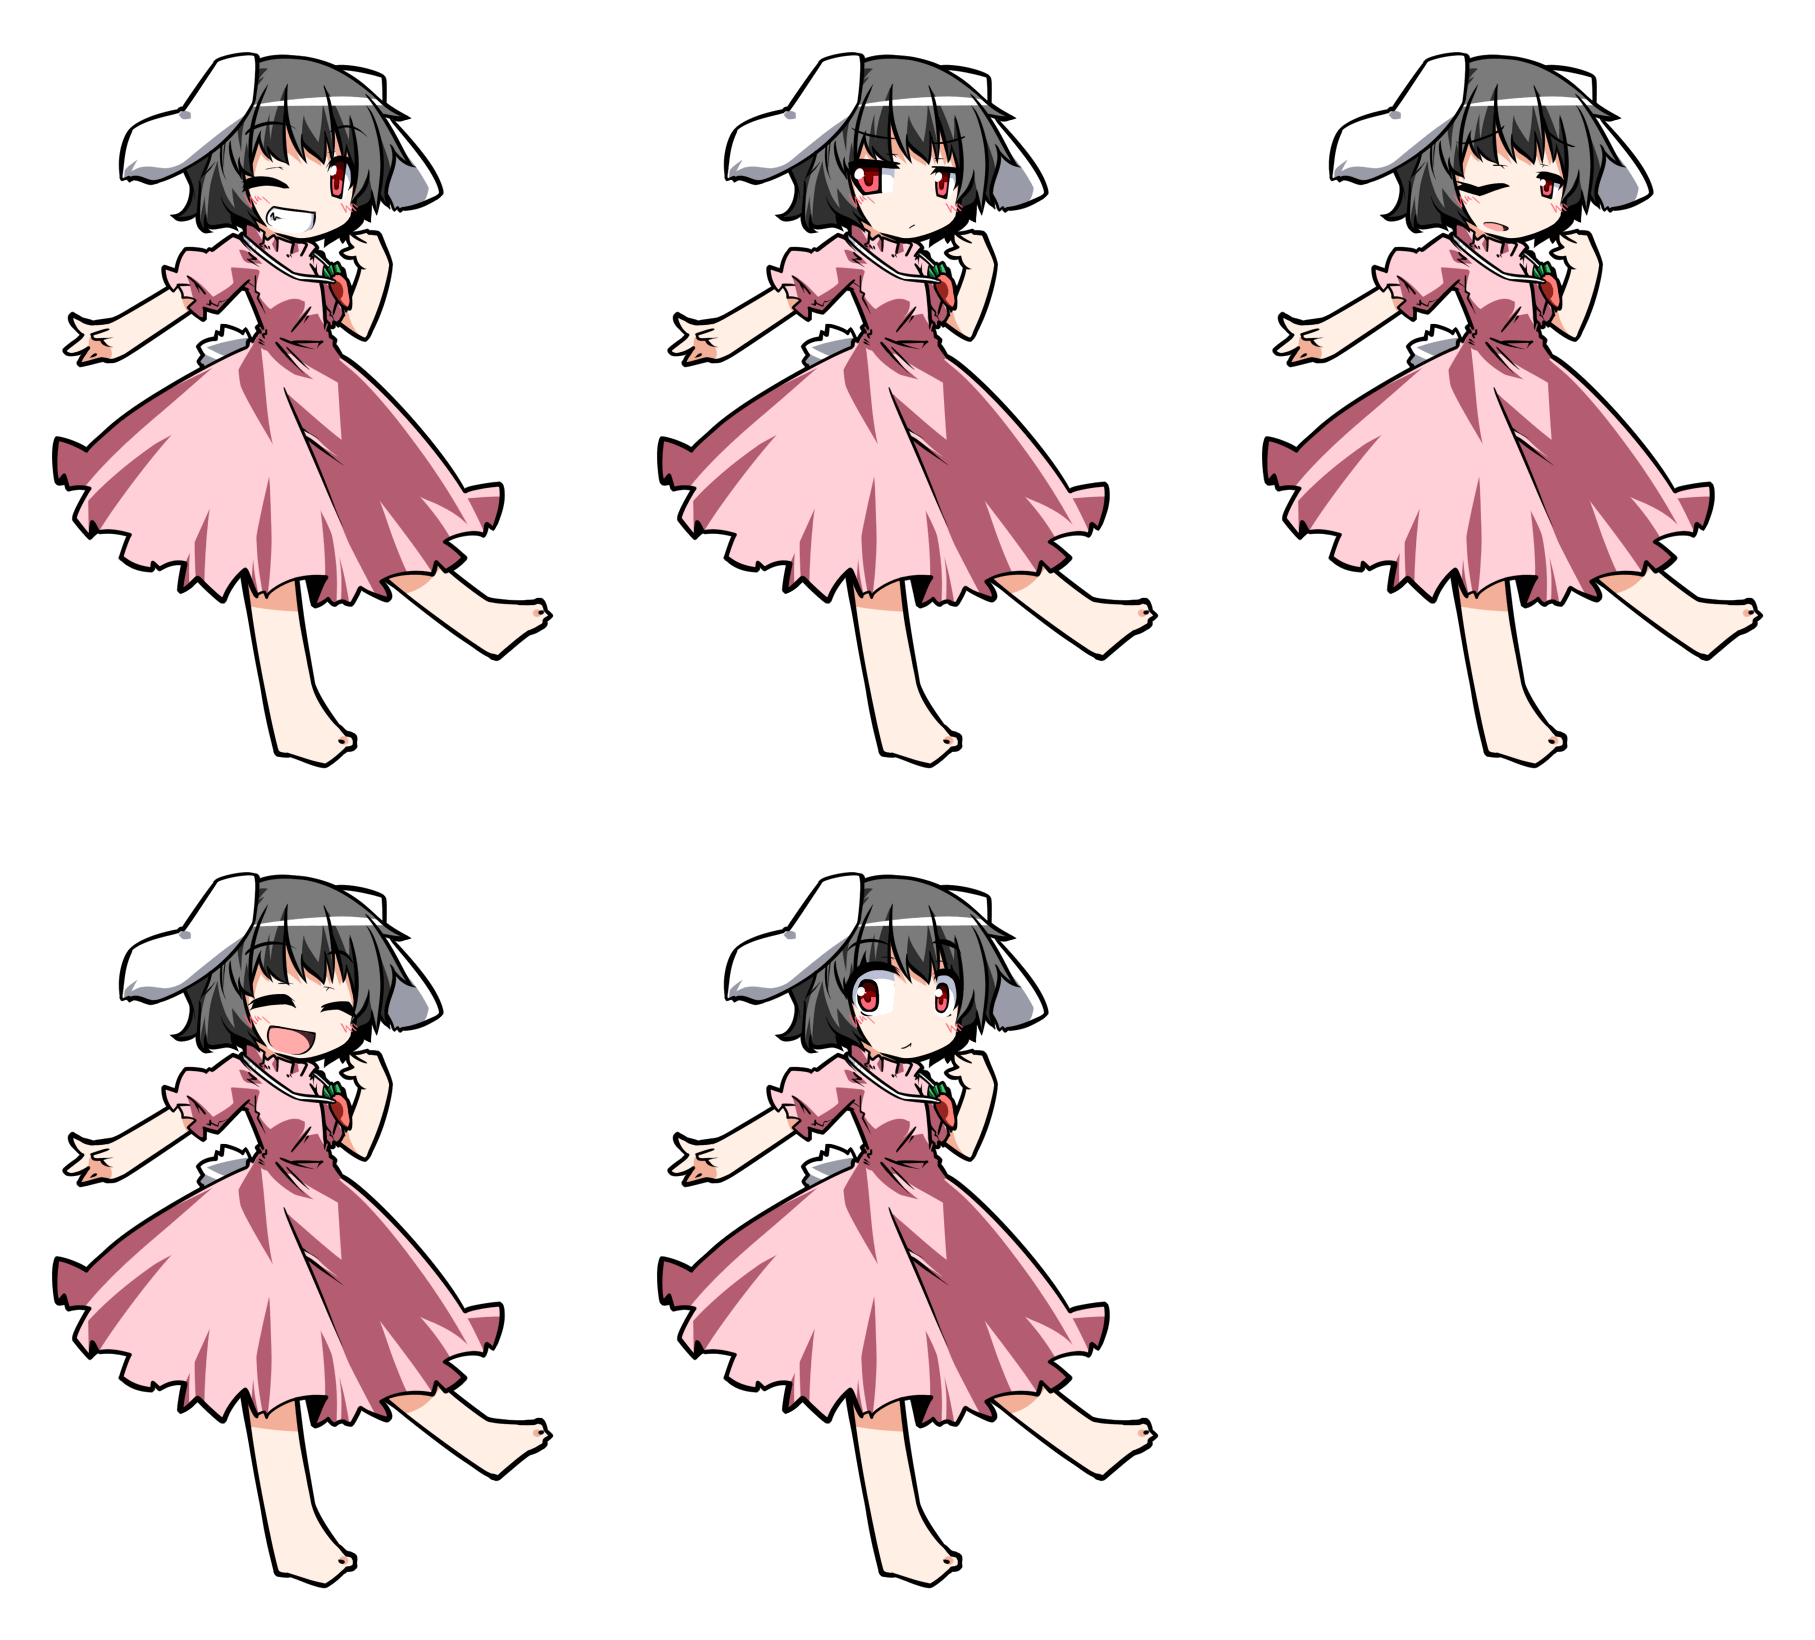 Touhou Puppet Dance Performance (Touhoumon) - Tewi Inaba